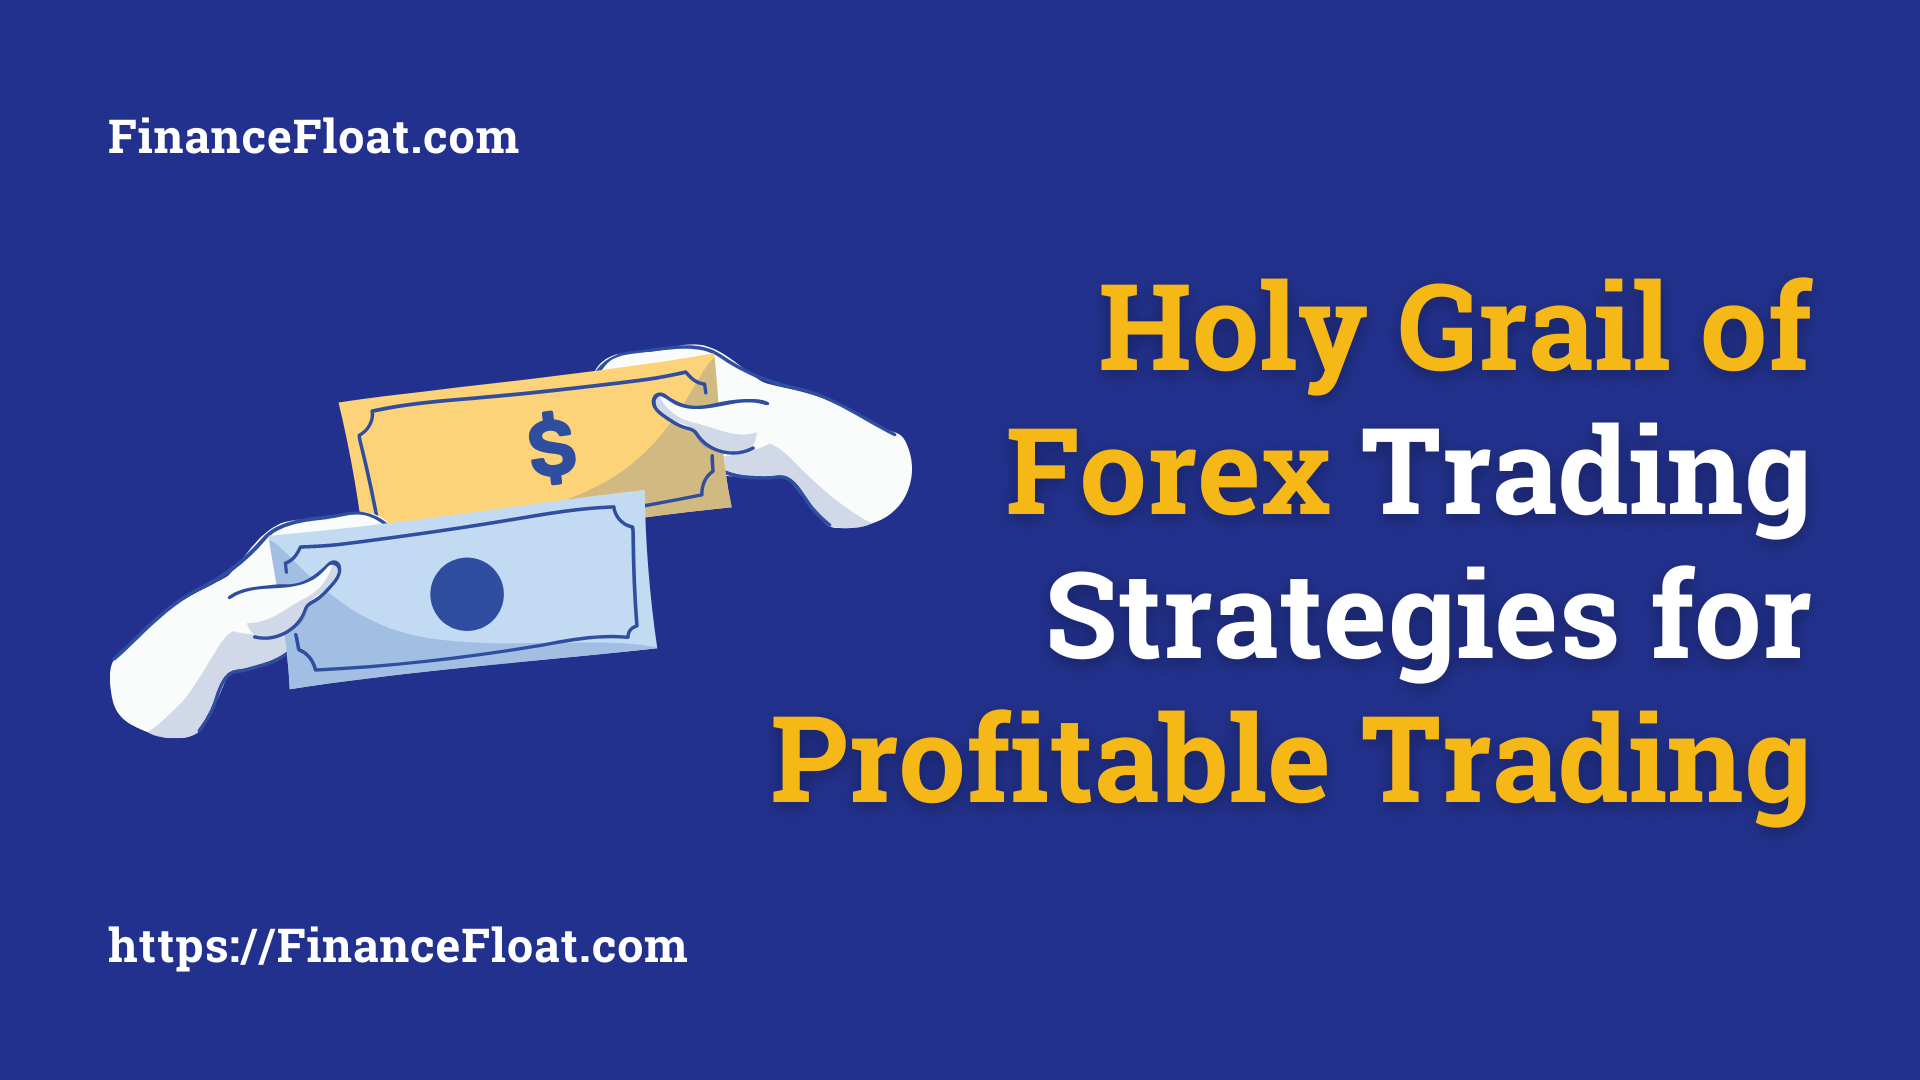 Holy Grail of Forex Trading Strategies for Profitable Trading